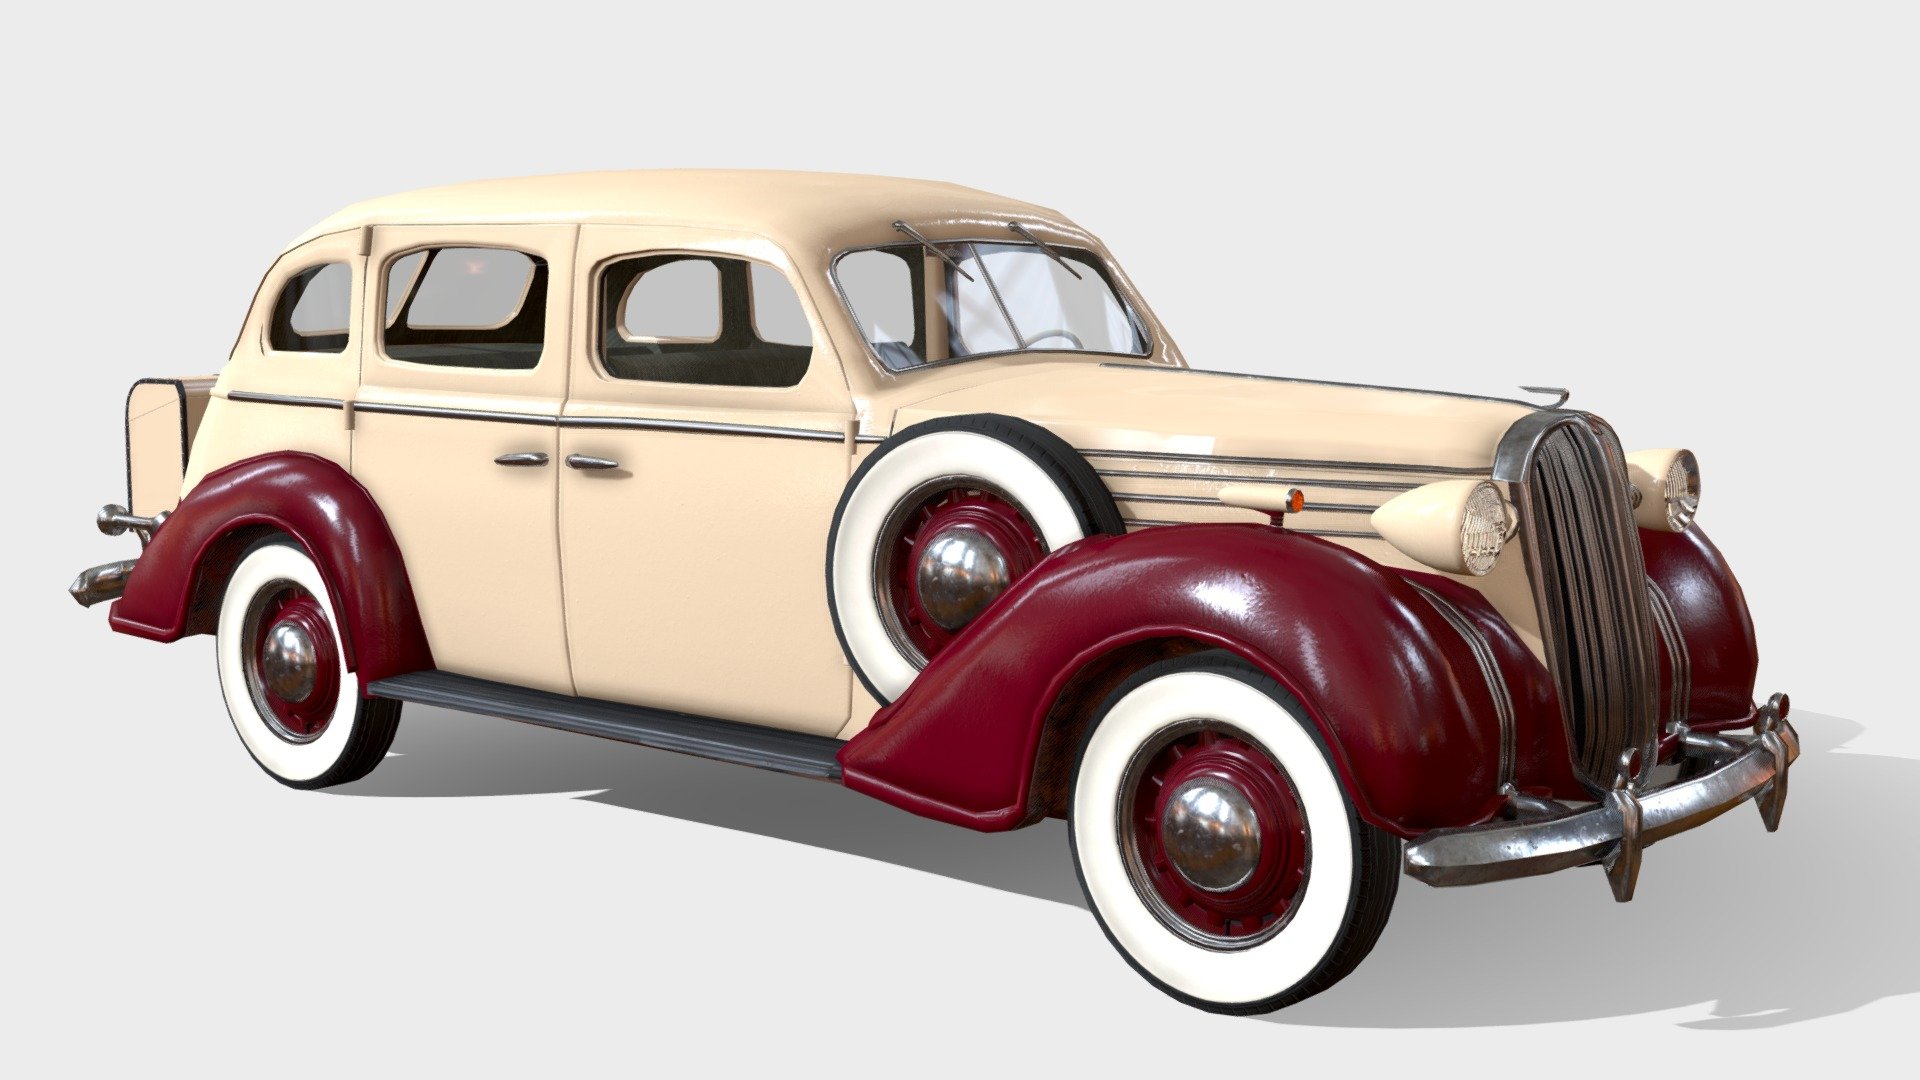 Detailed 3D model of a 1930s American sedan. Mostly inspried by 1936 Chevrolet and Buick, but also parts from DeSoto and Plymouth.

Download includes FBX file, OBJ export file, textures and original .BLEND file, with all separate objects, for easy modification, easy rigging, etc.

Model is not triangulized, to preserve ease of editing.

Doors can open, wheels can spin!
Textures from CC0 material library at ambientcg.com as well as some from textures.com

For any sort of customization or custom models, as comission, contact me!

at RealRobinMik on Twitter

or roadkillfoxart at gmail - 1936 American Sedan (Buick Based) - Buy Royalty Free 3D model by Libau Media (@robinmikart) 3d model